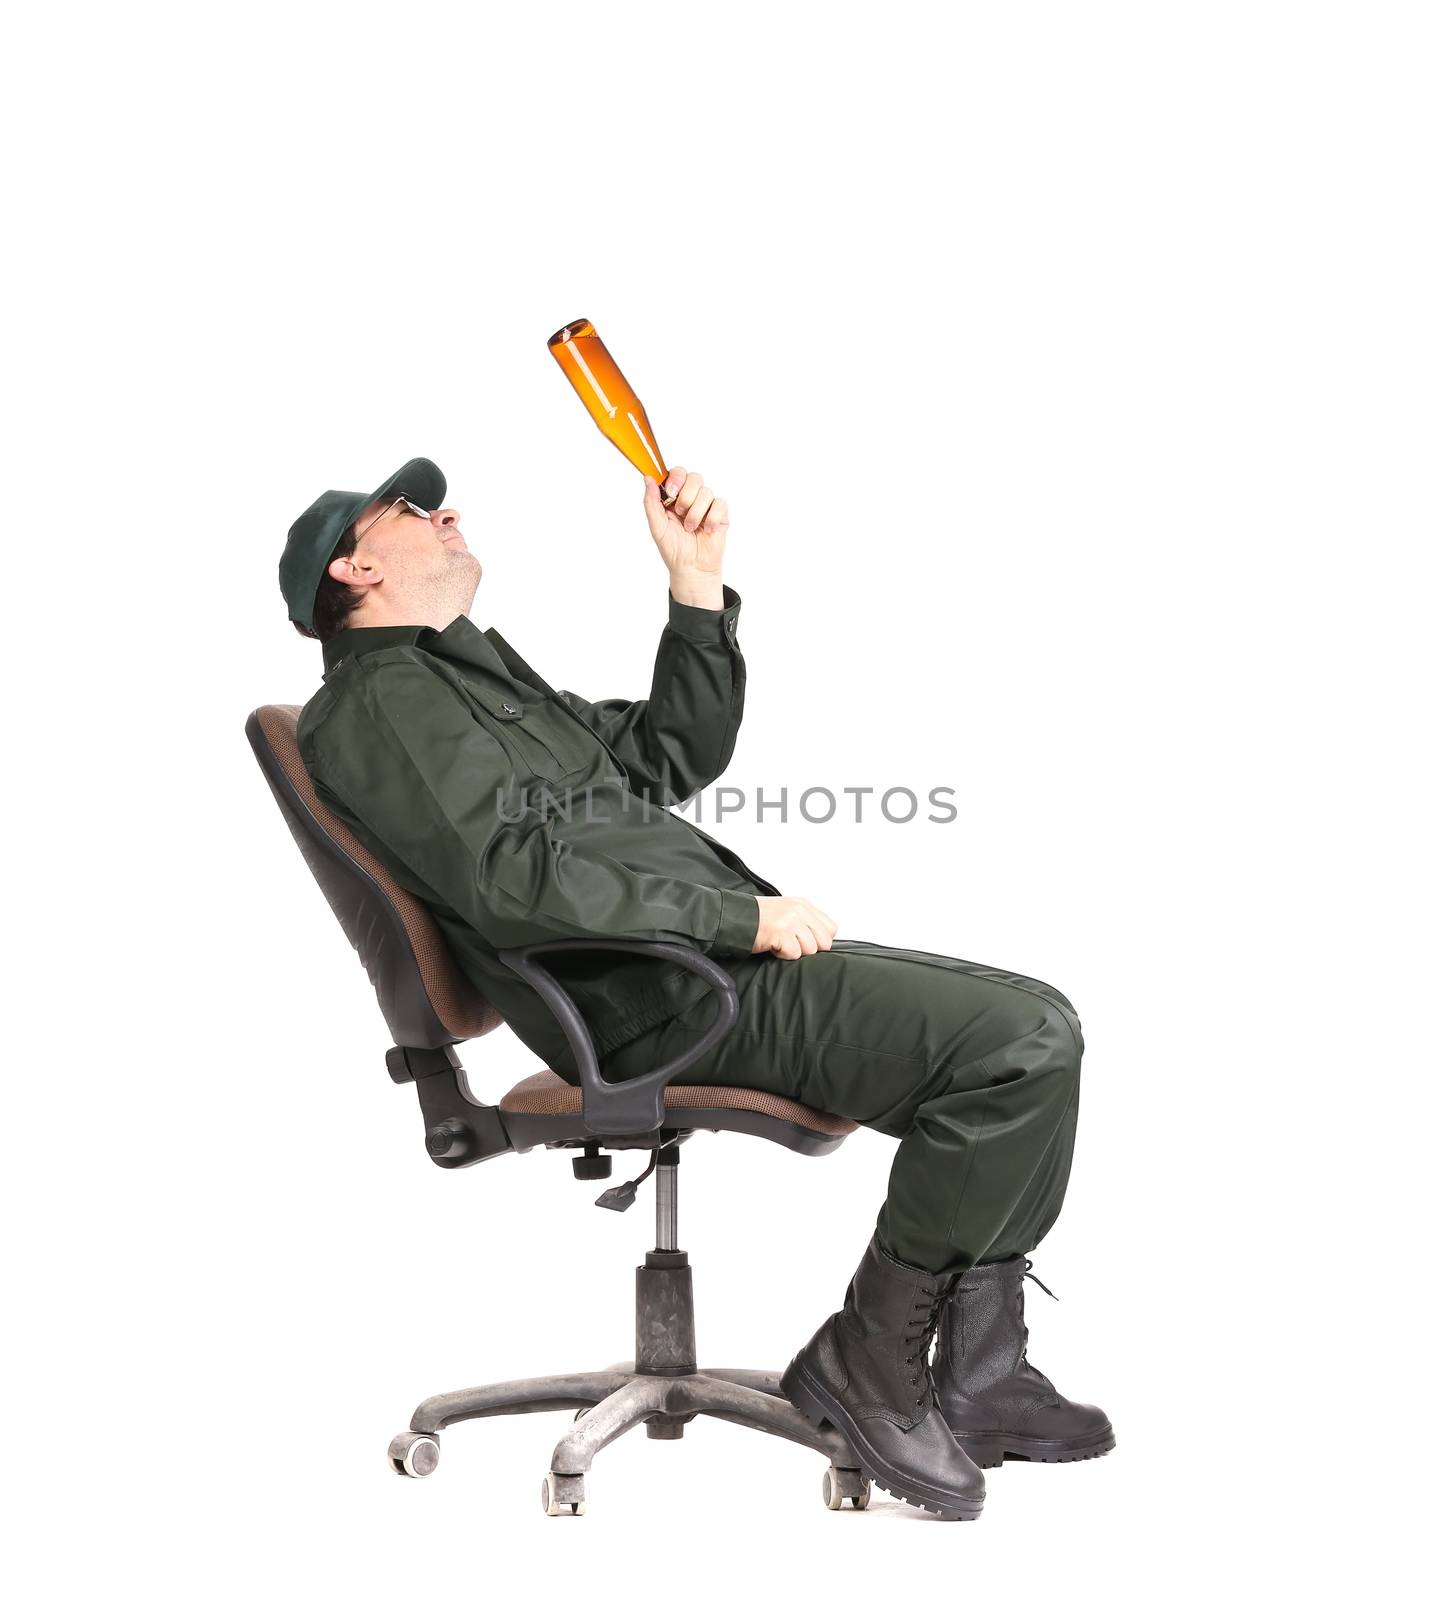 Worker in glasses sitting with beer. Isolated on a white background.